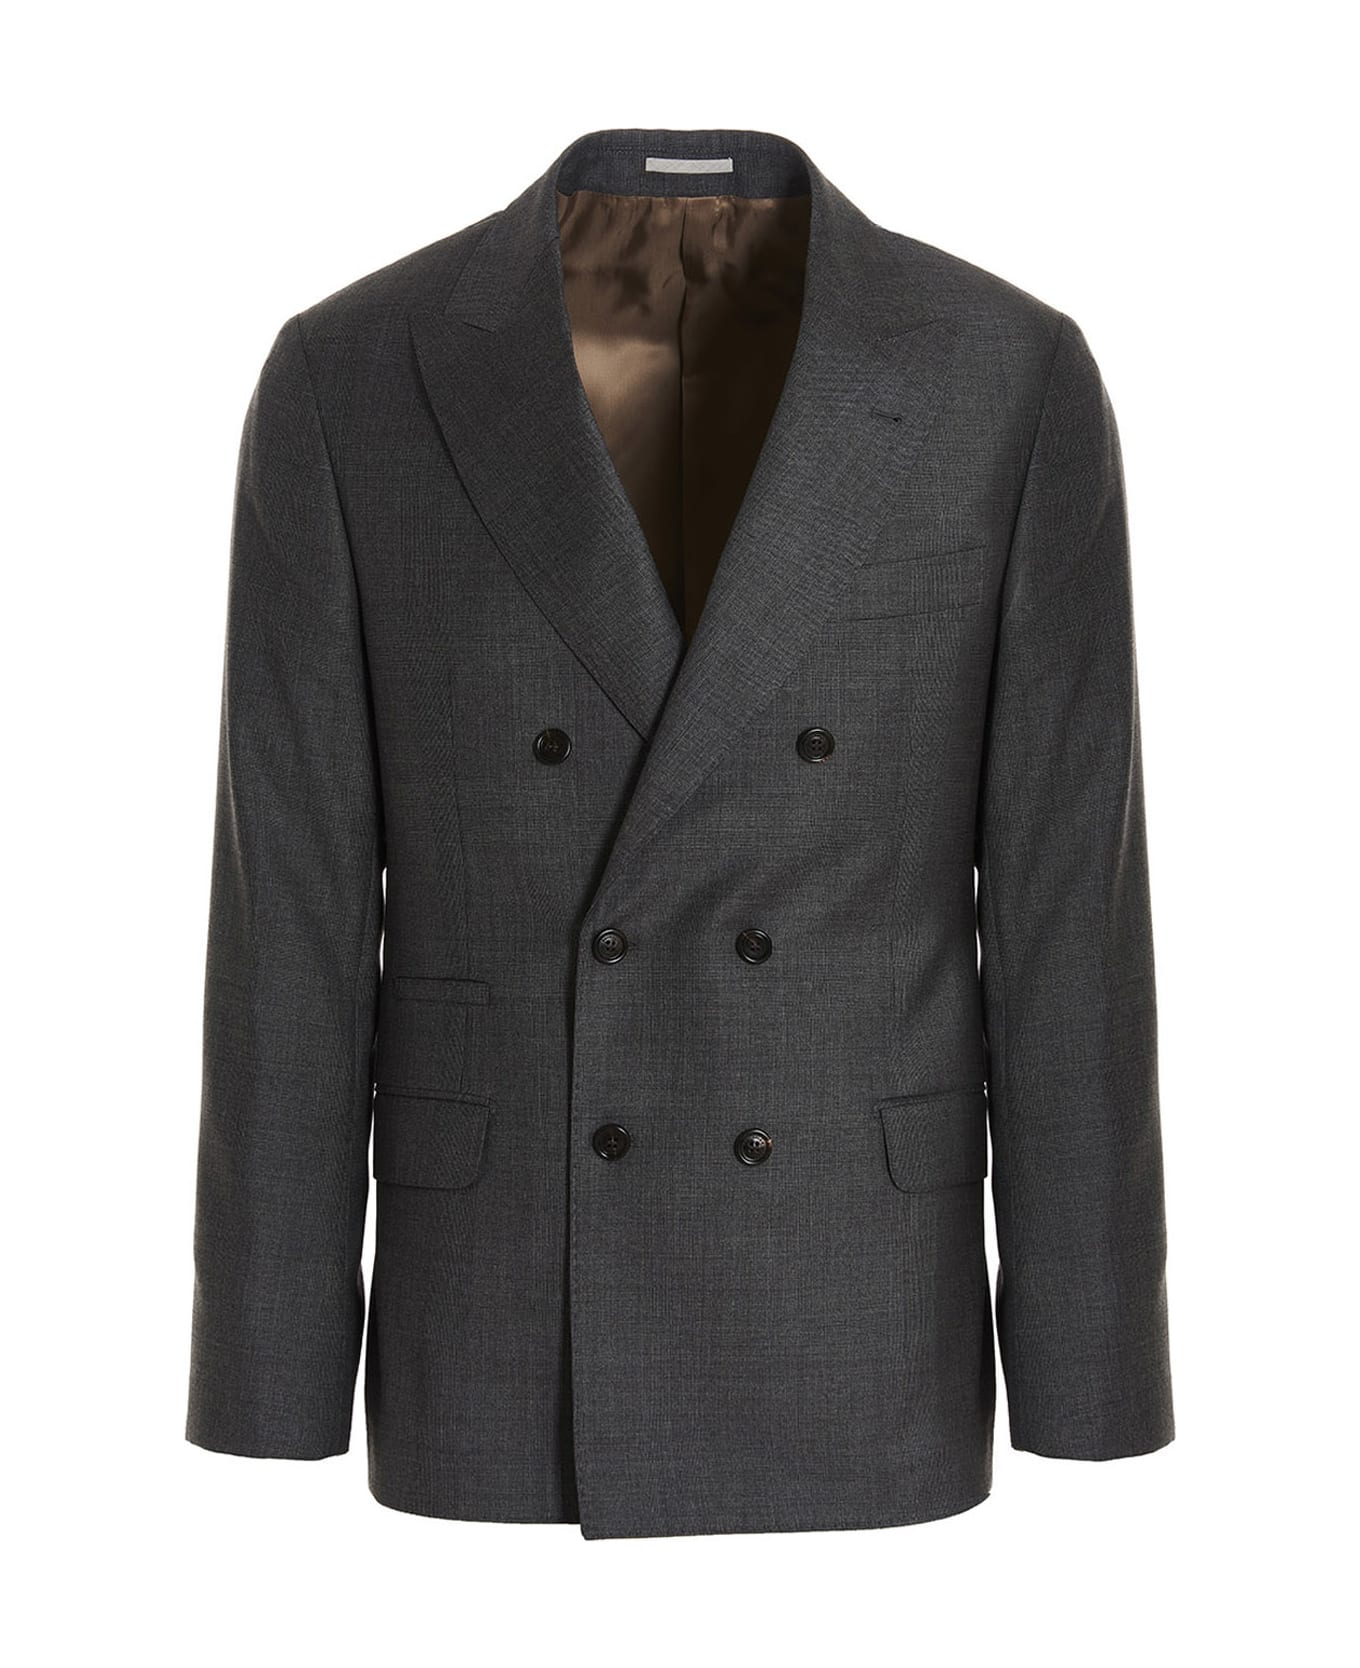 Brunello Cucinelli Prince Of Wales Suit | italist